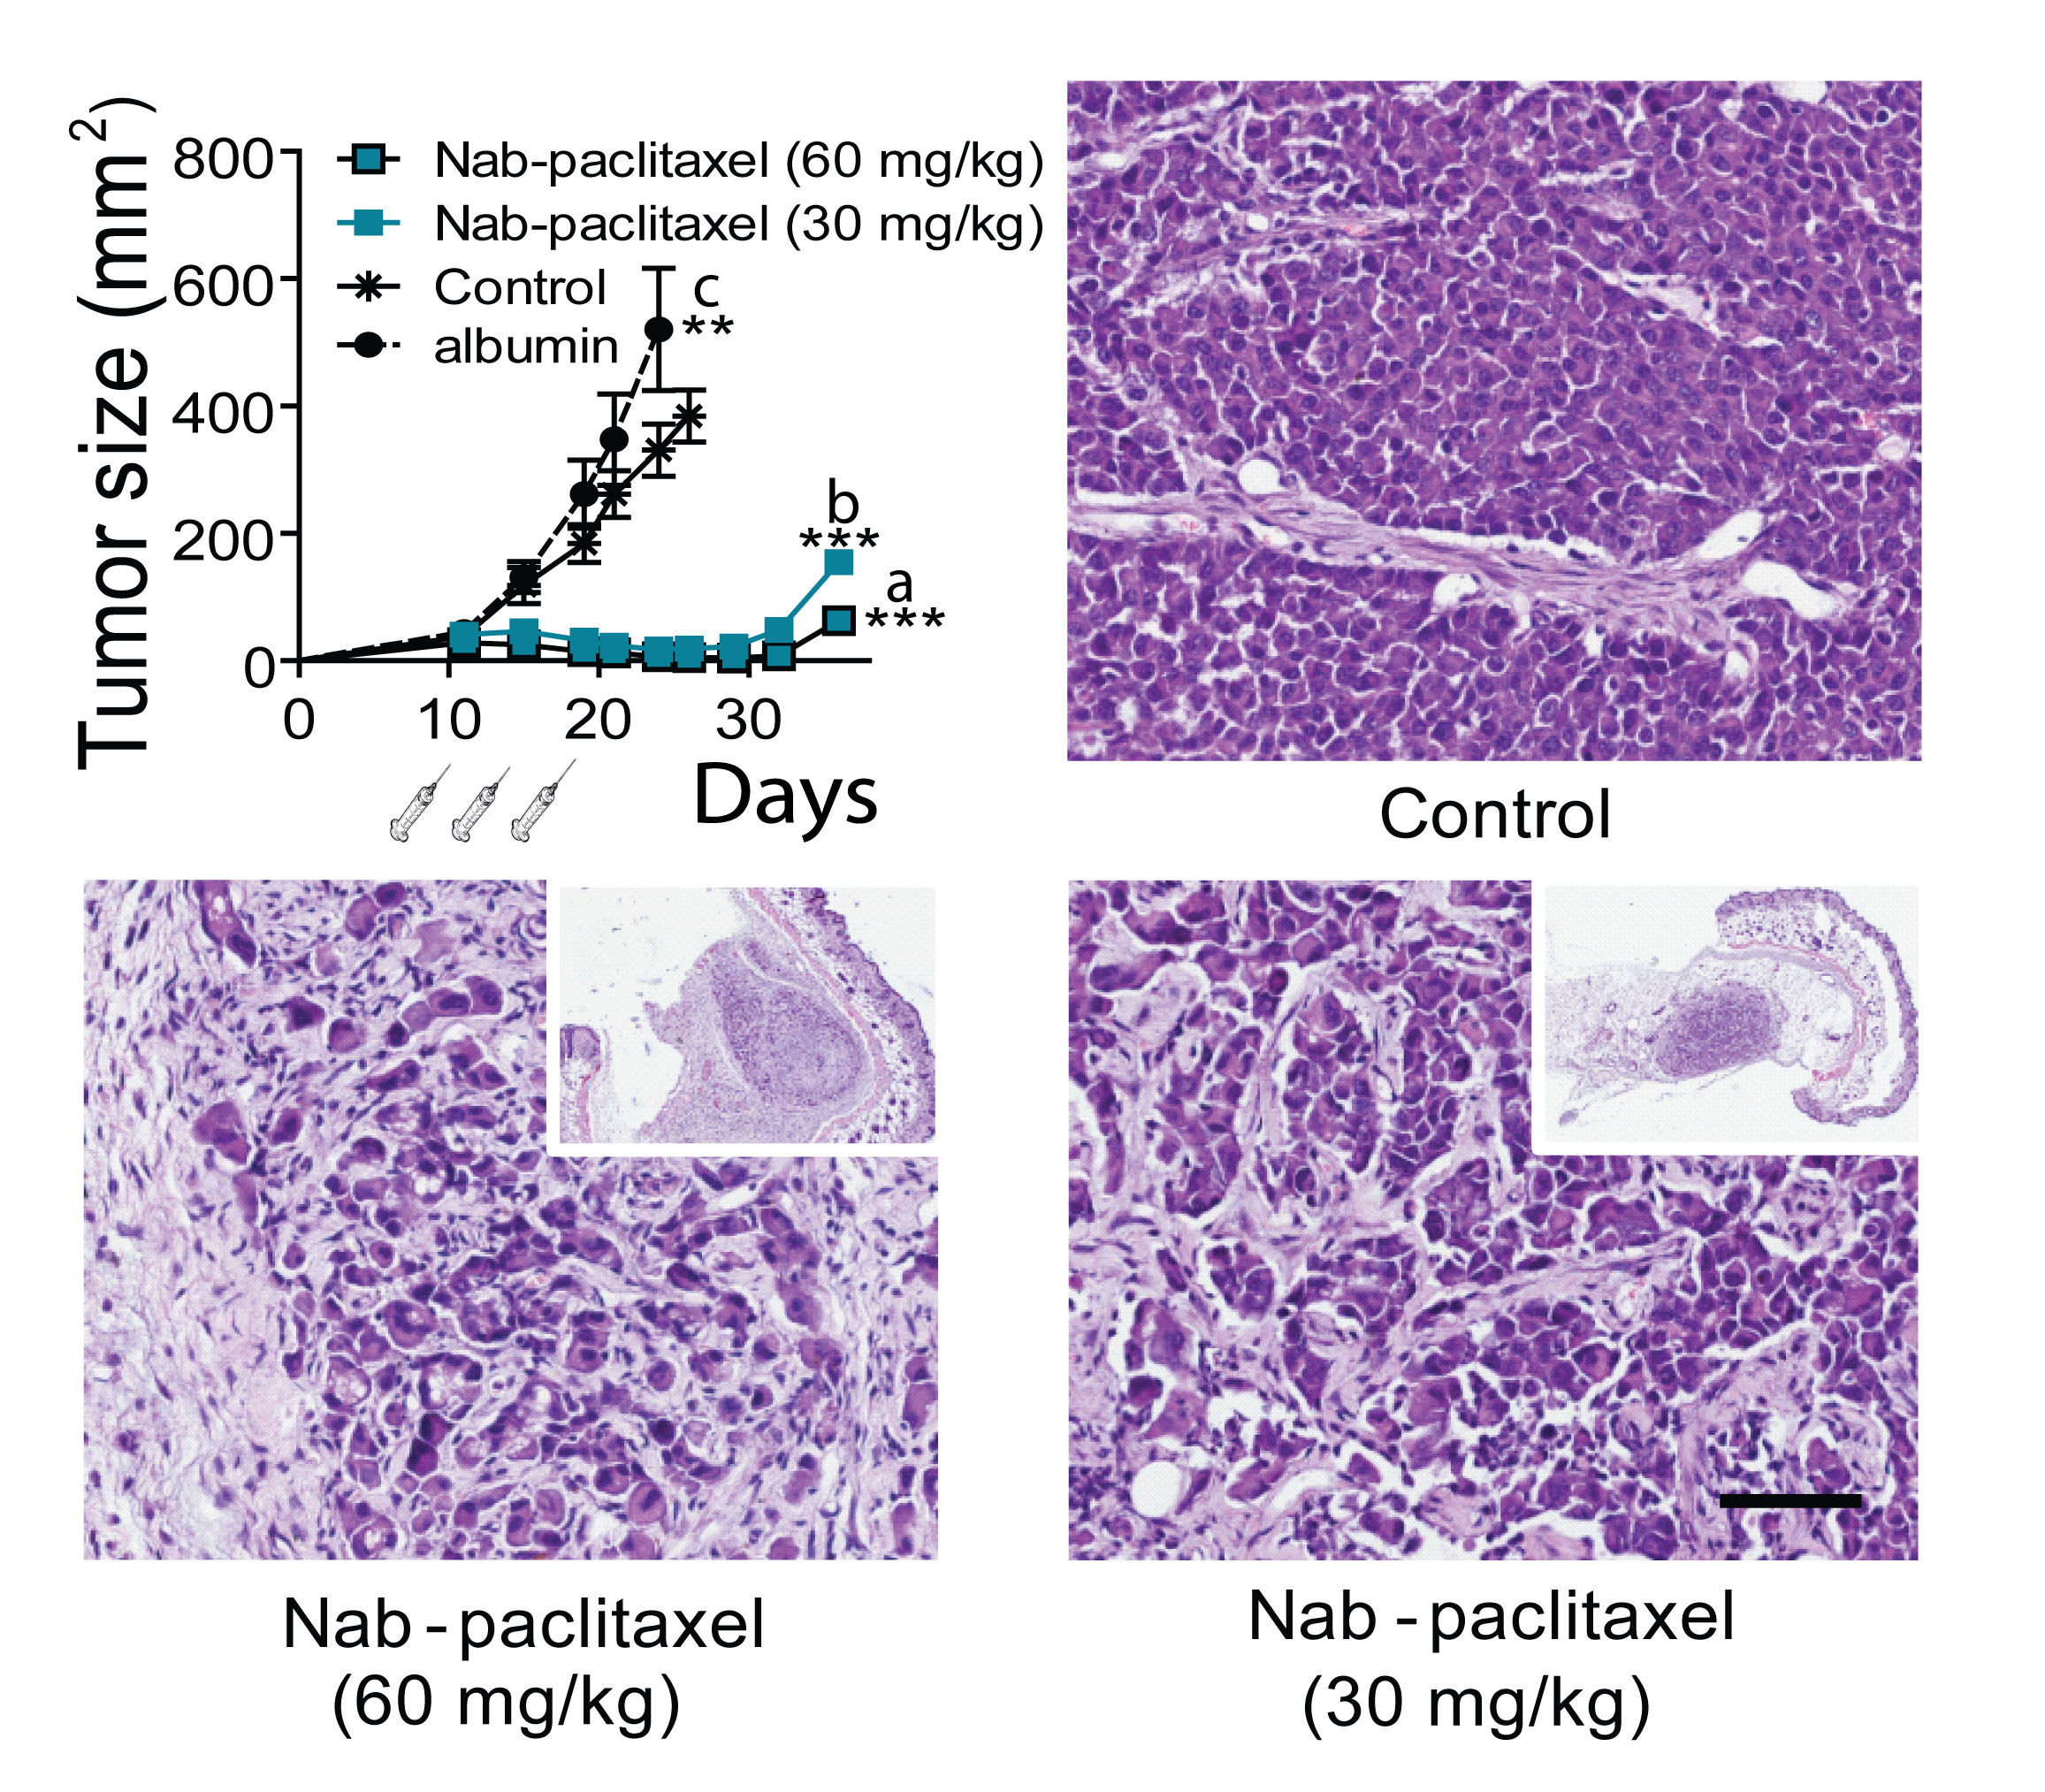 Effect of Nab-paclitaxel on tumor growth.